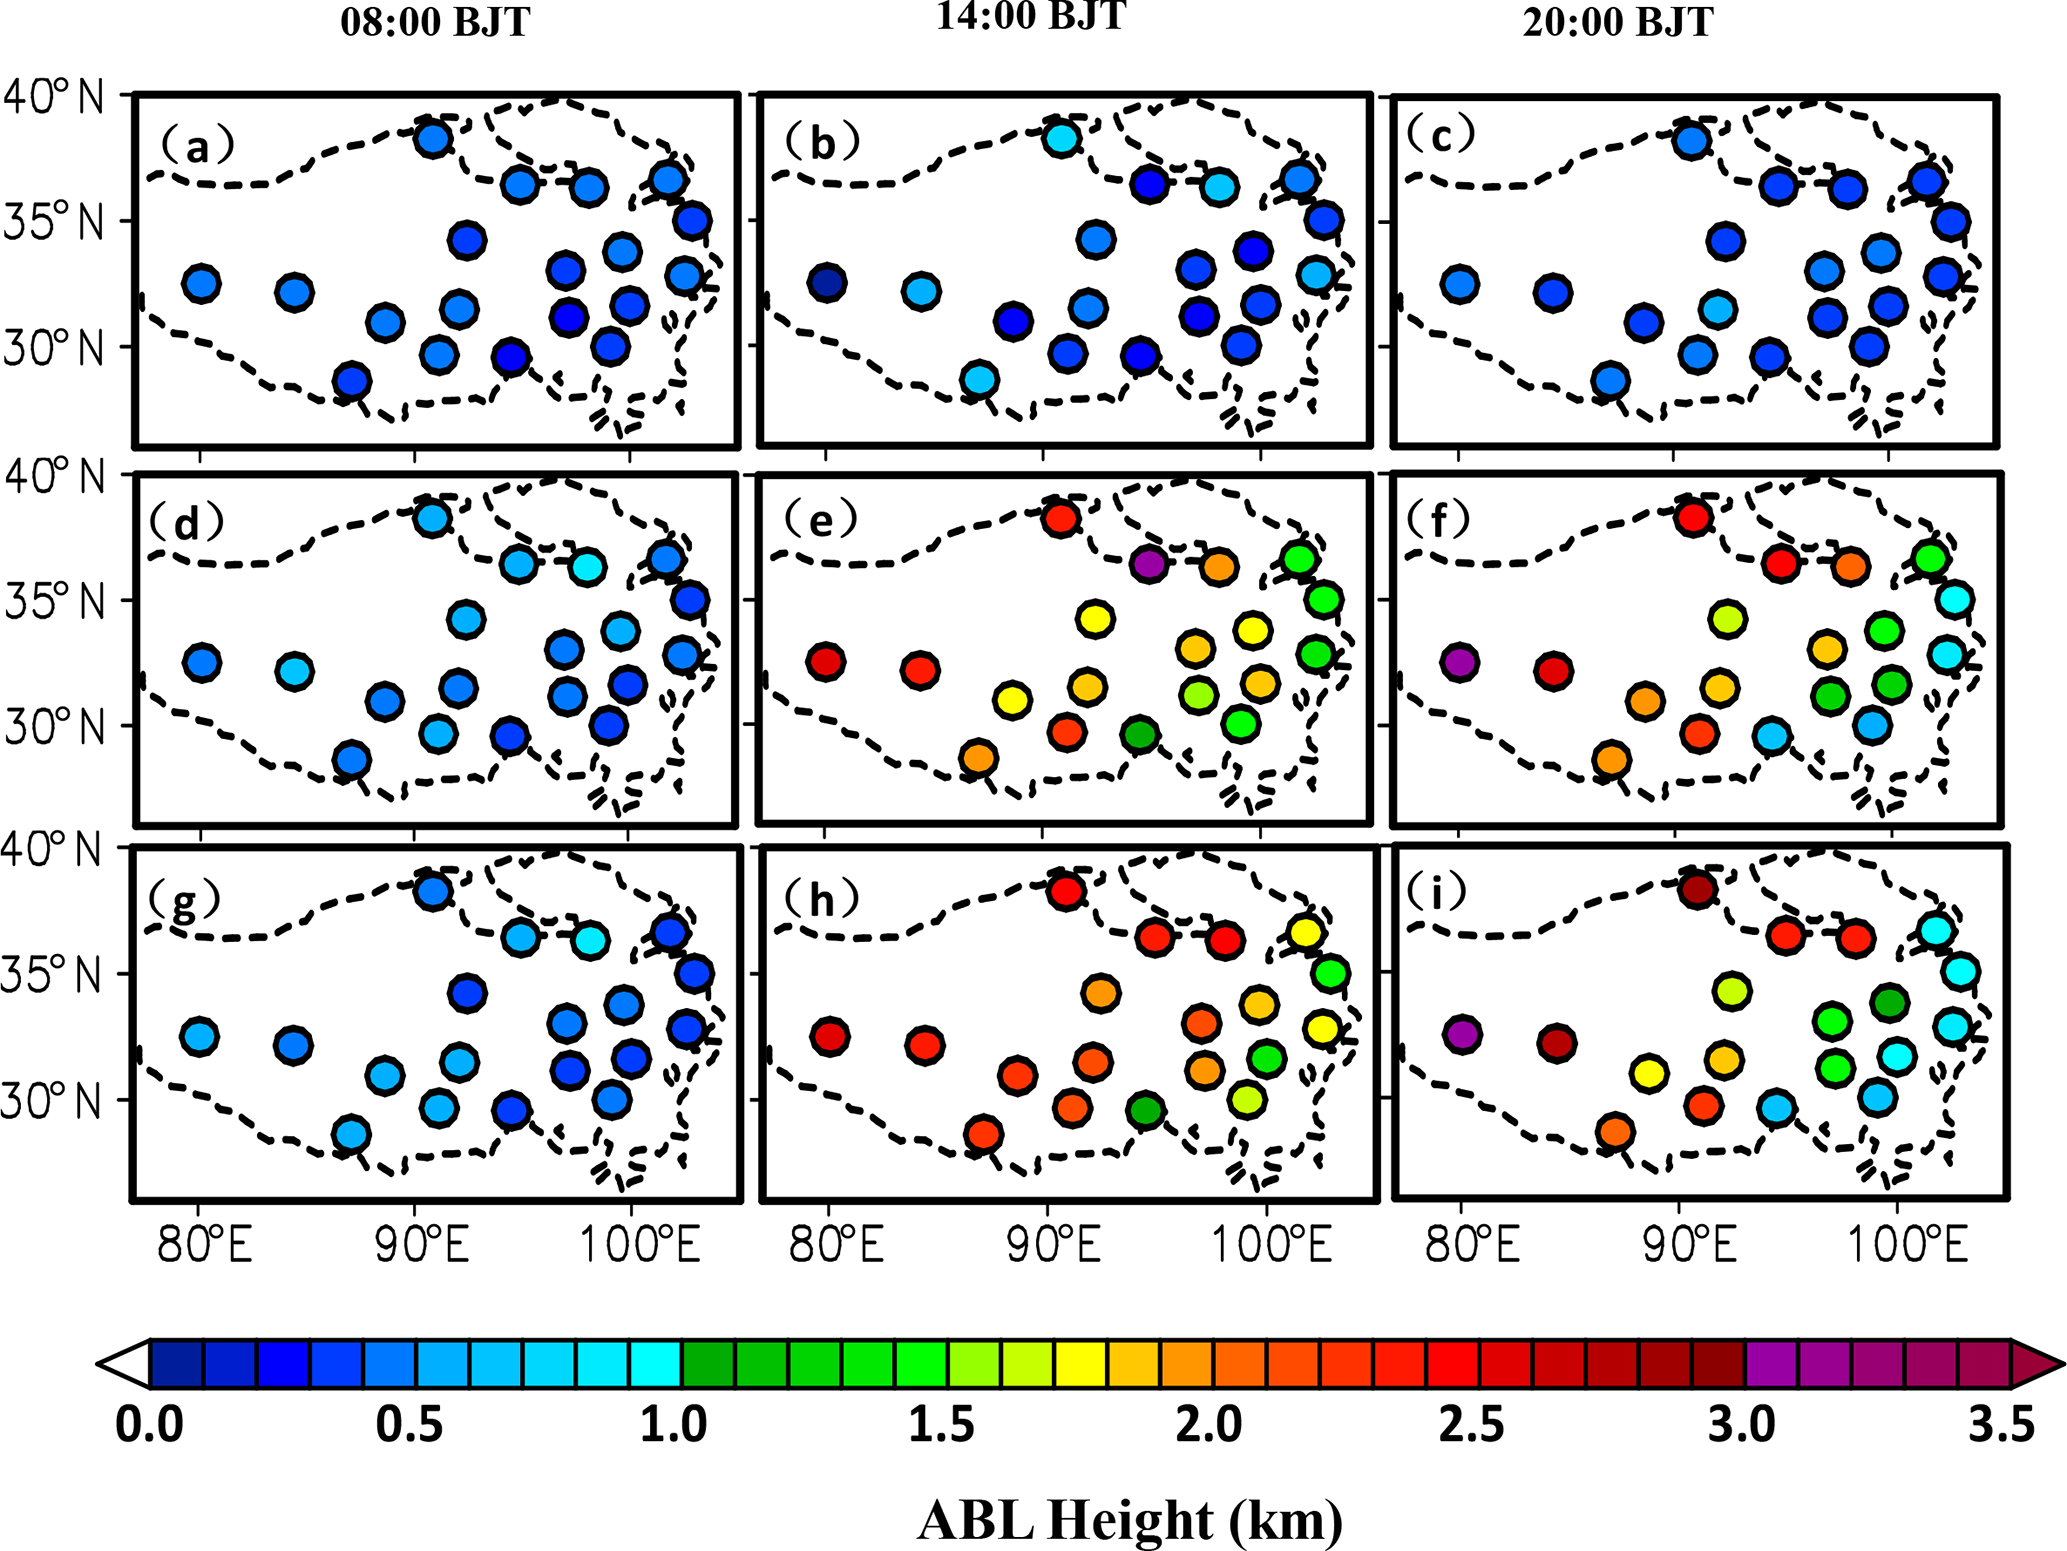 Acp Characteristics Of The Summer Atmospheric Boundary Layer Height Over The Tibetan Plateau And Influential Factors